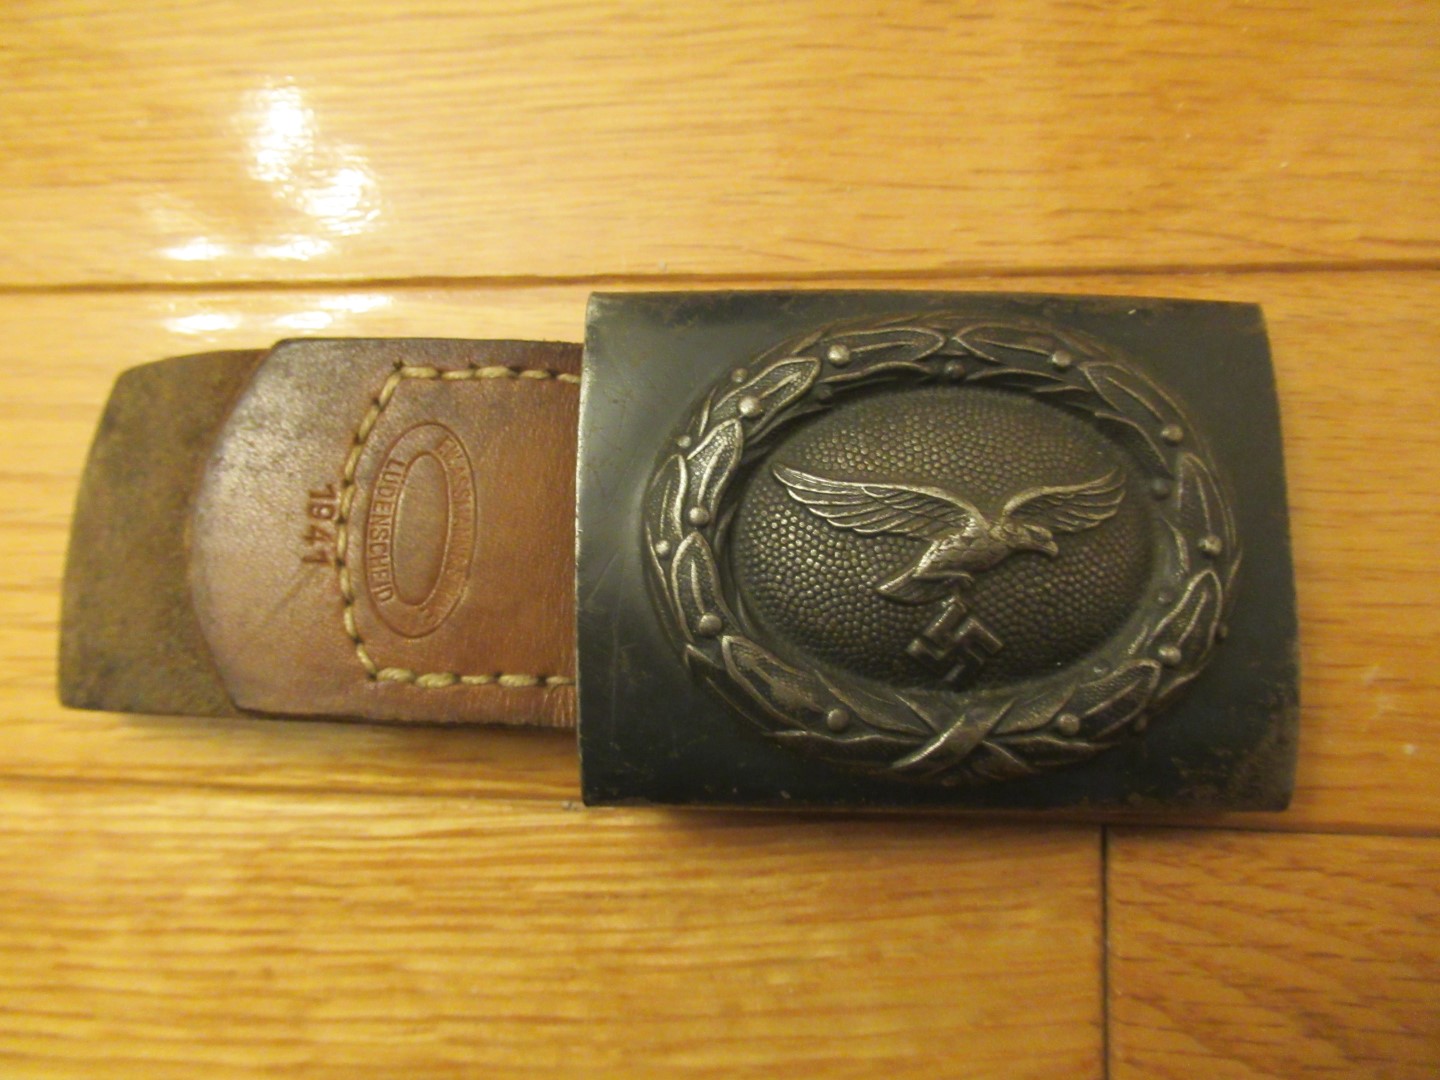 LW steel buckle with leather tab, minty